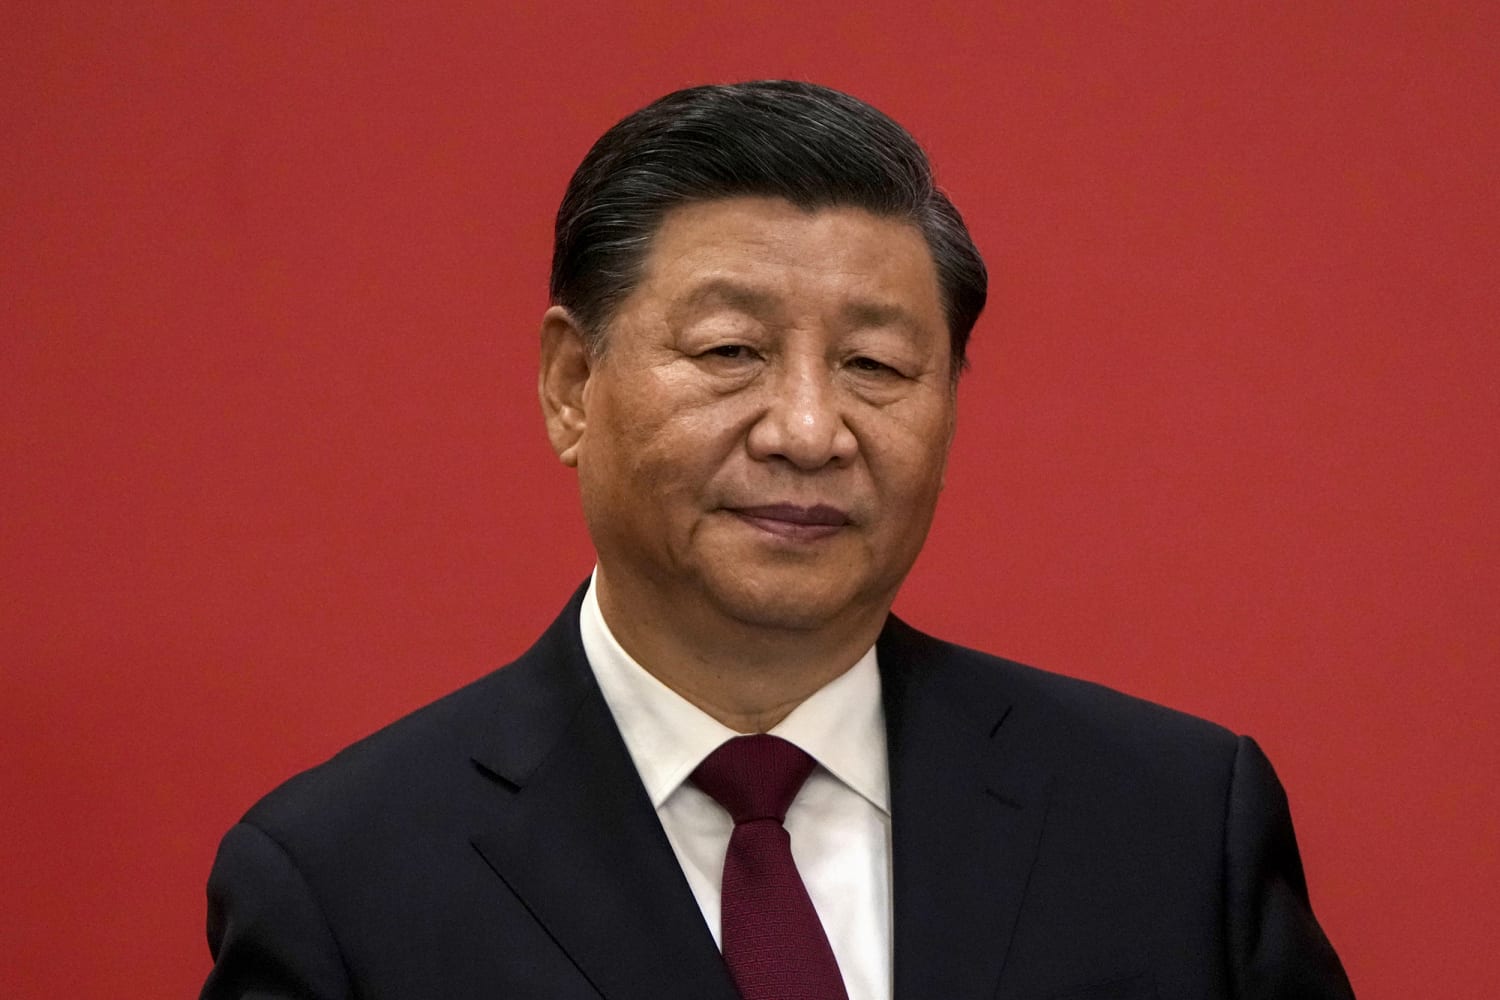 Xi Jinping secures historic third term as leader